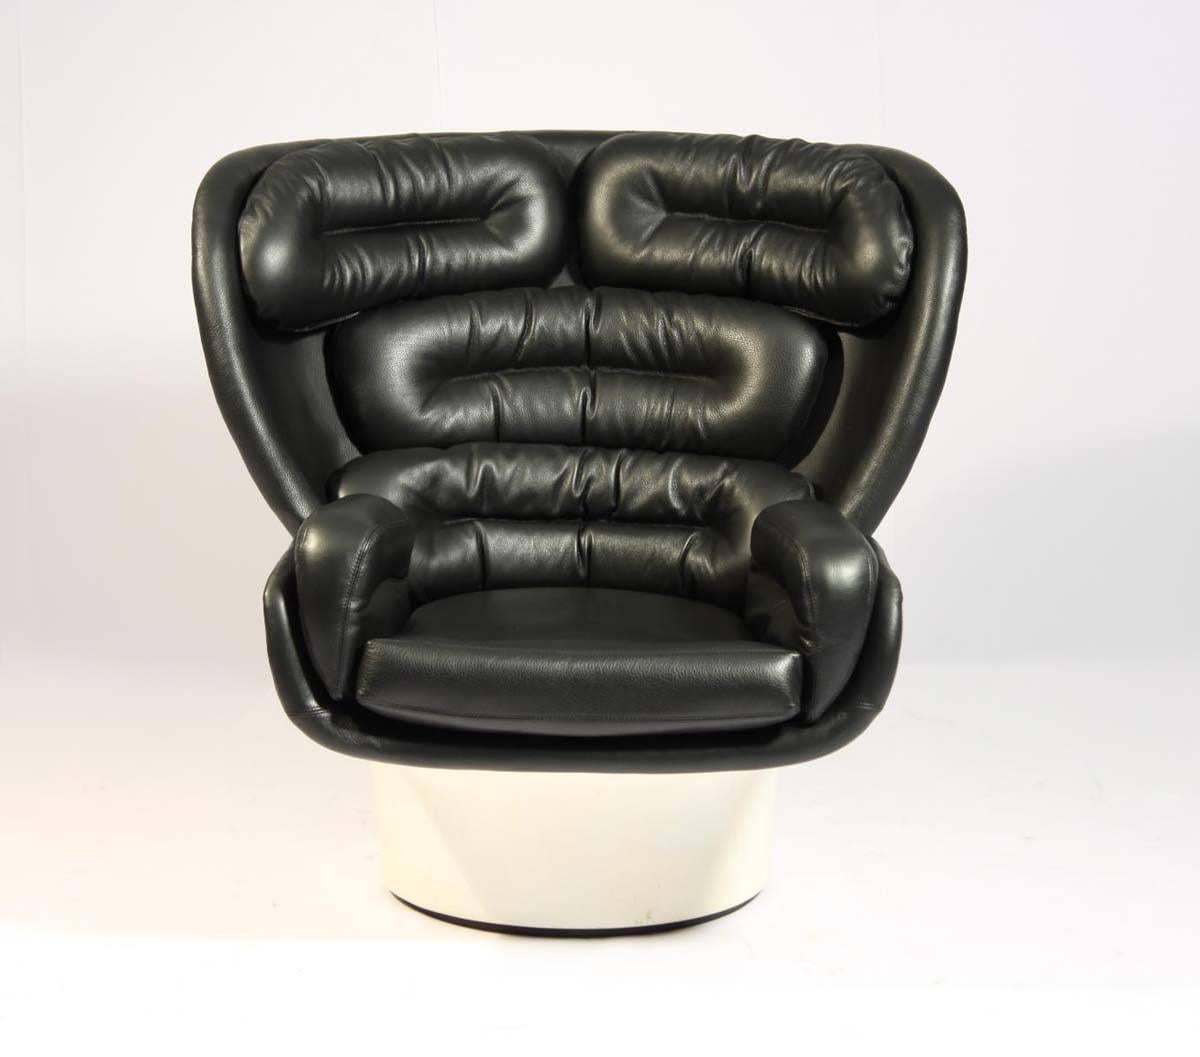 Elda chair designed by Joe Colombo in 1963 and manufactured by Comfort, white fiberglass and black leather, this chair is an icon of the Italian design, made with a turntable iron base, the chair offers a comfortable and amazing seat.